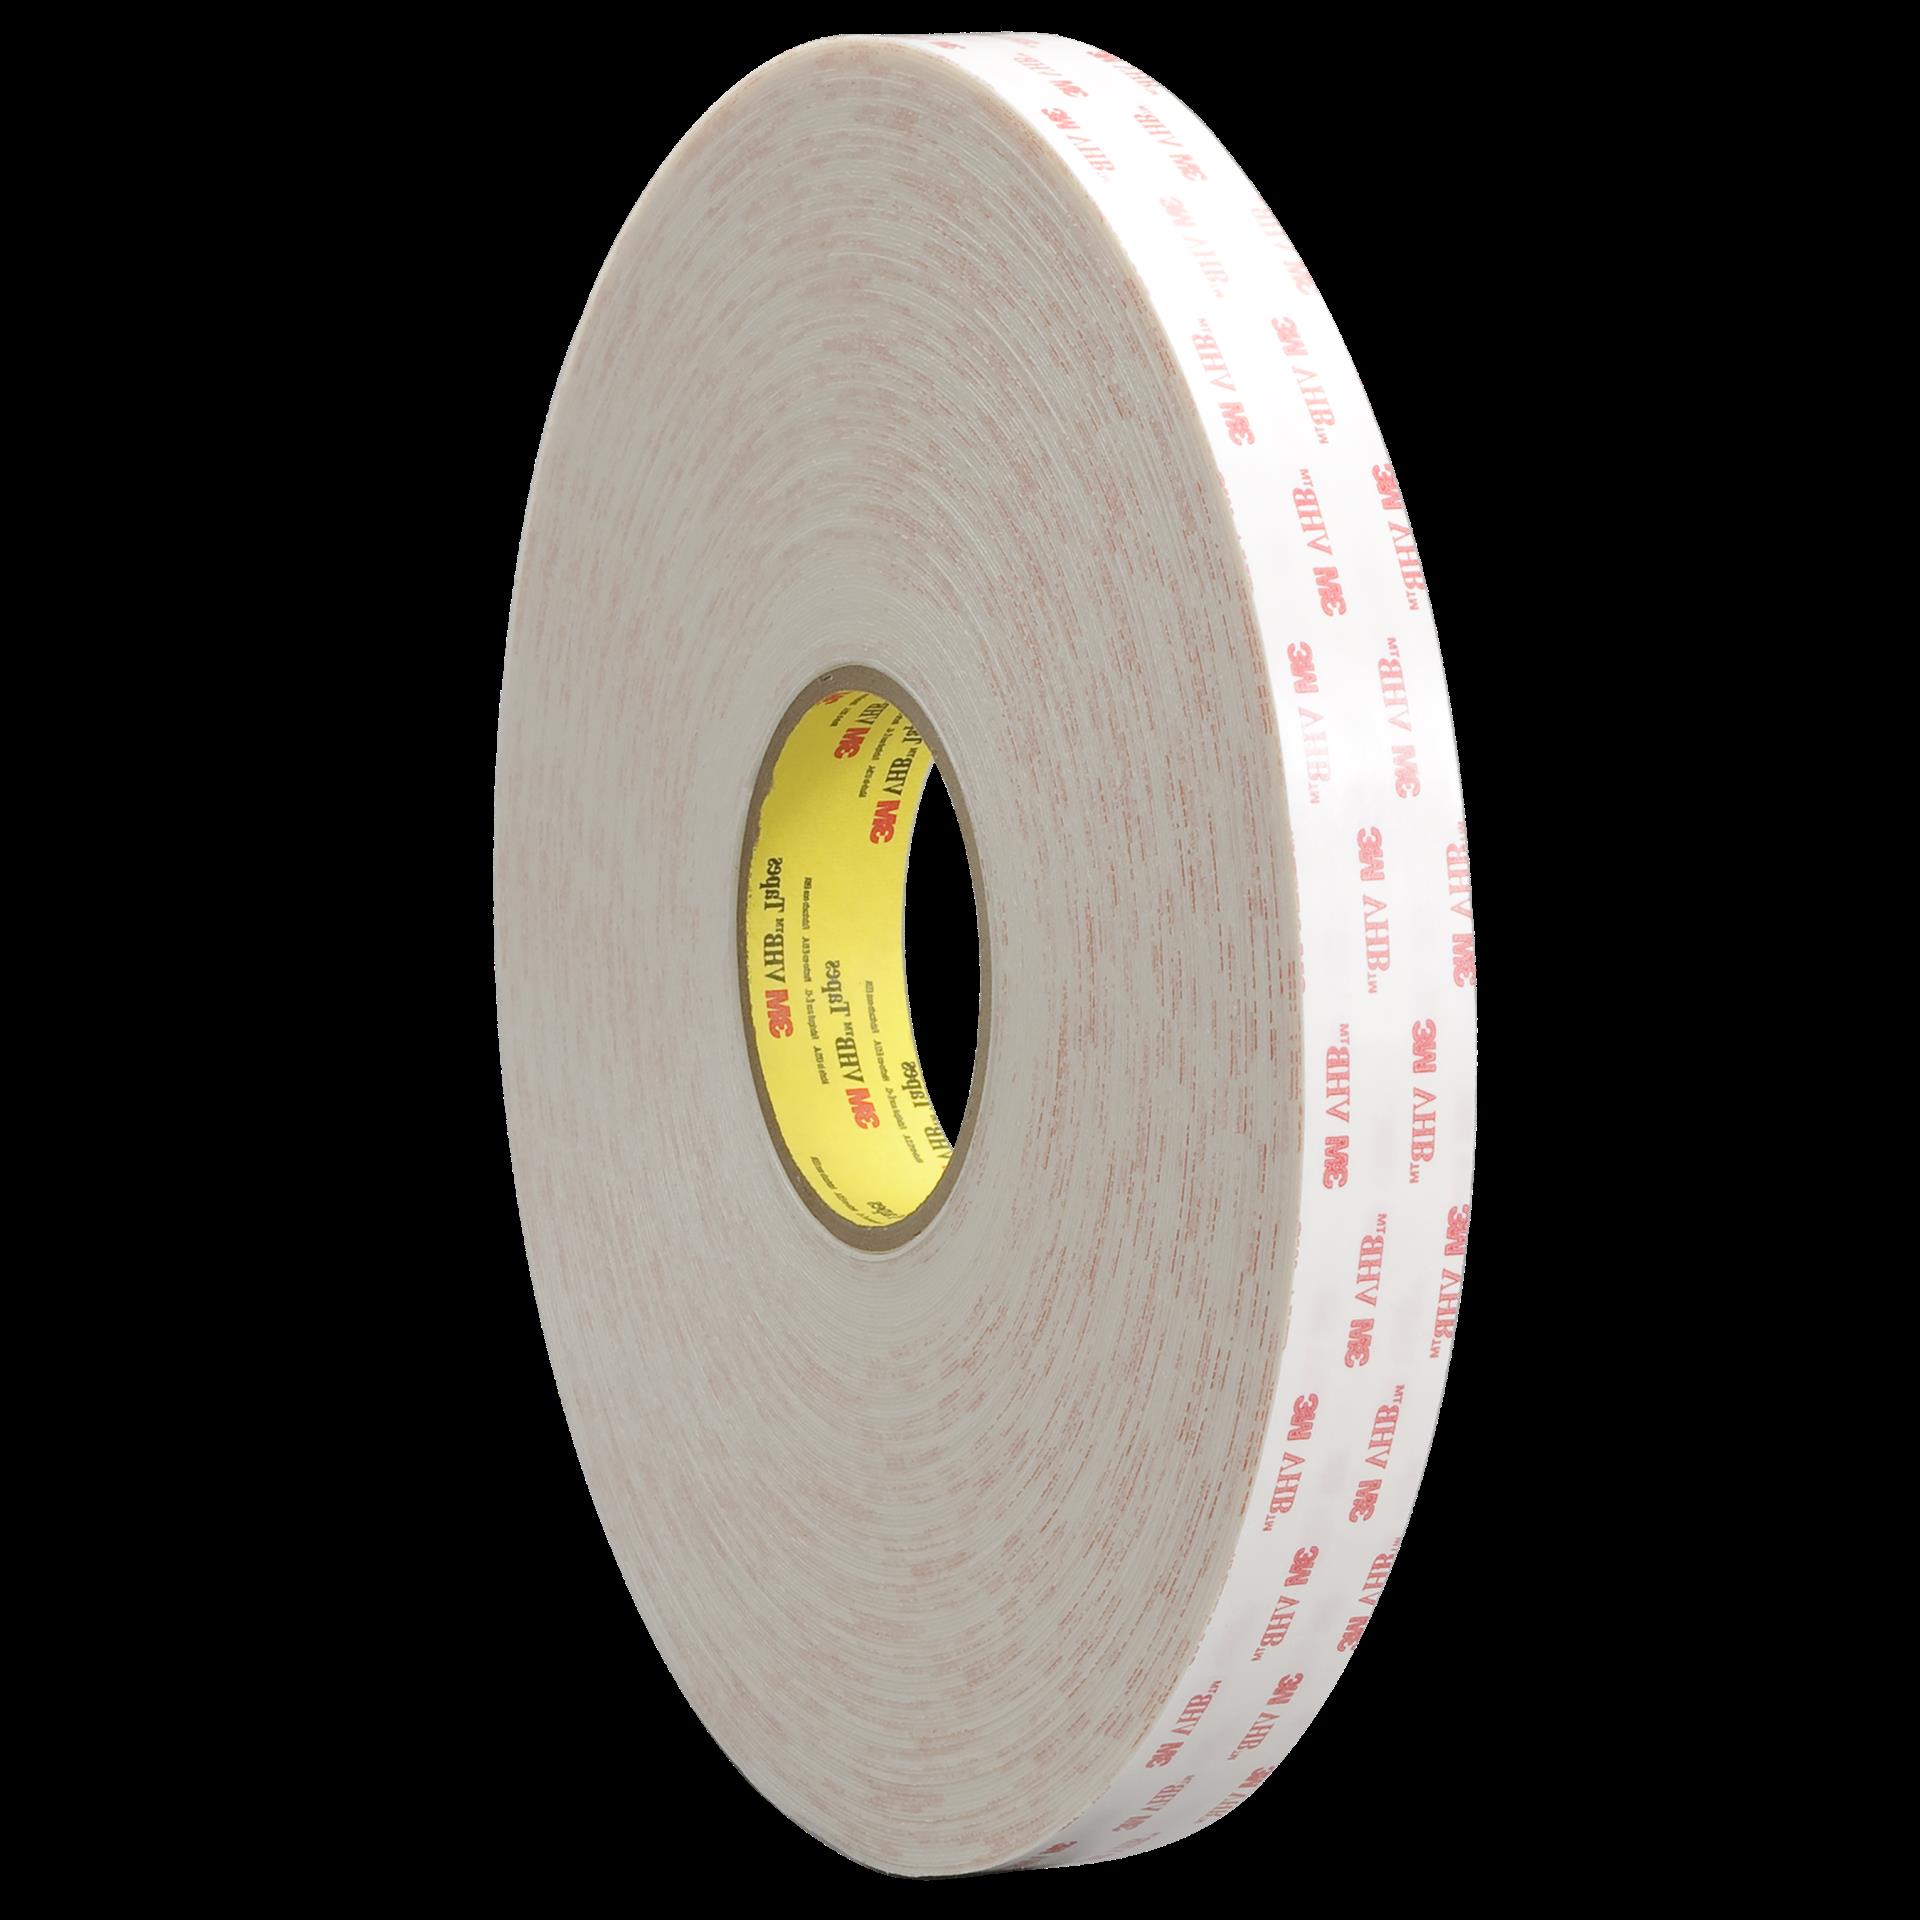 3M 410M Double Sided Masking Tape 1/2 x 36 yard Roll (3 Pack)